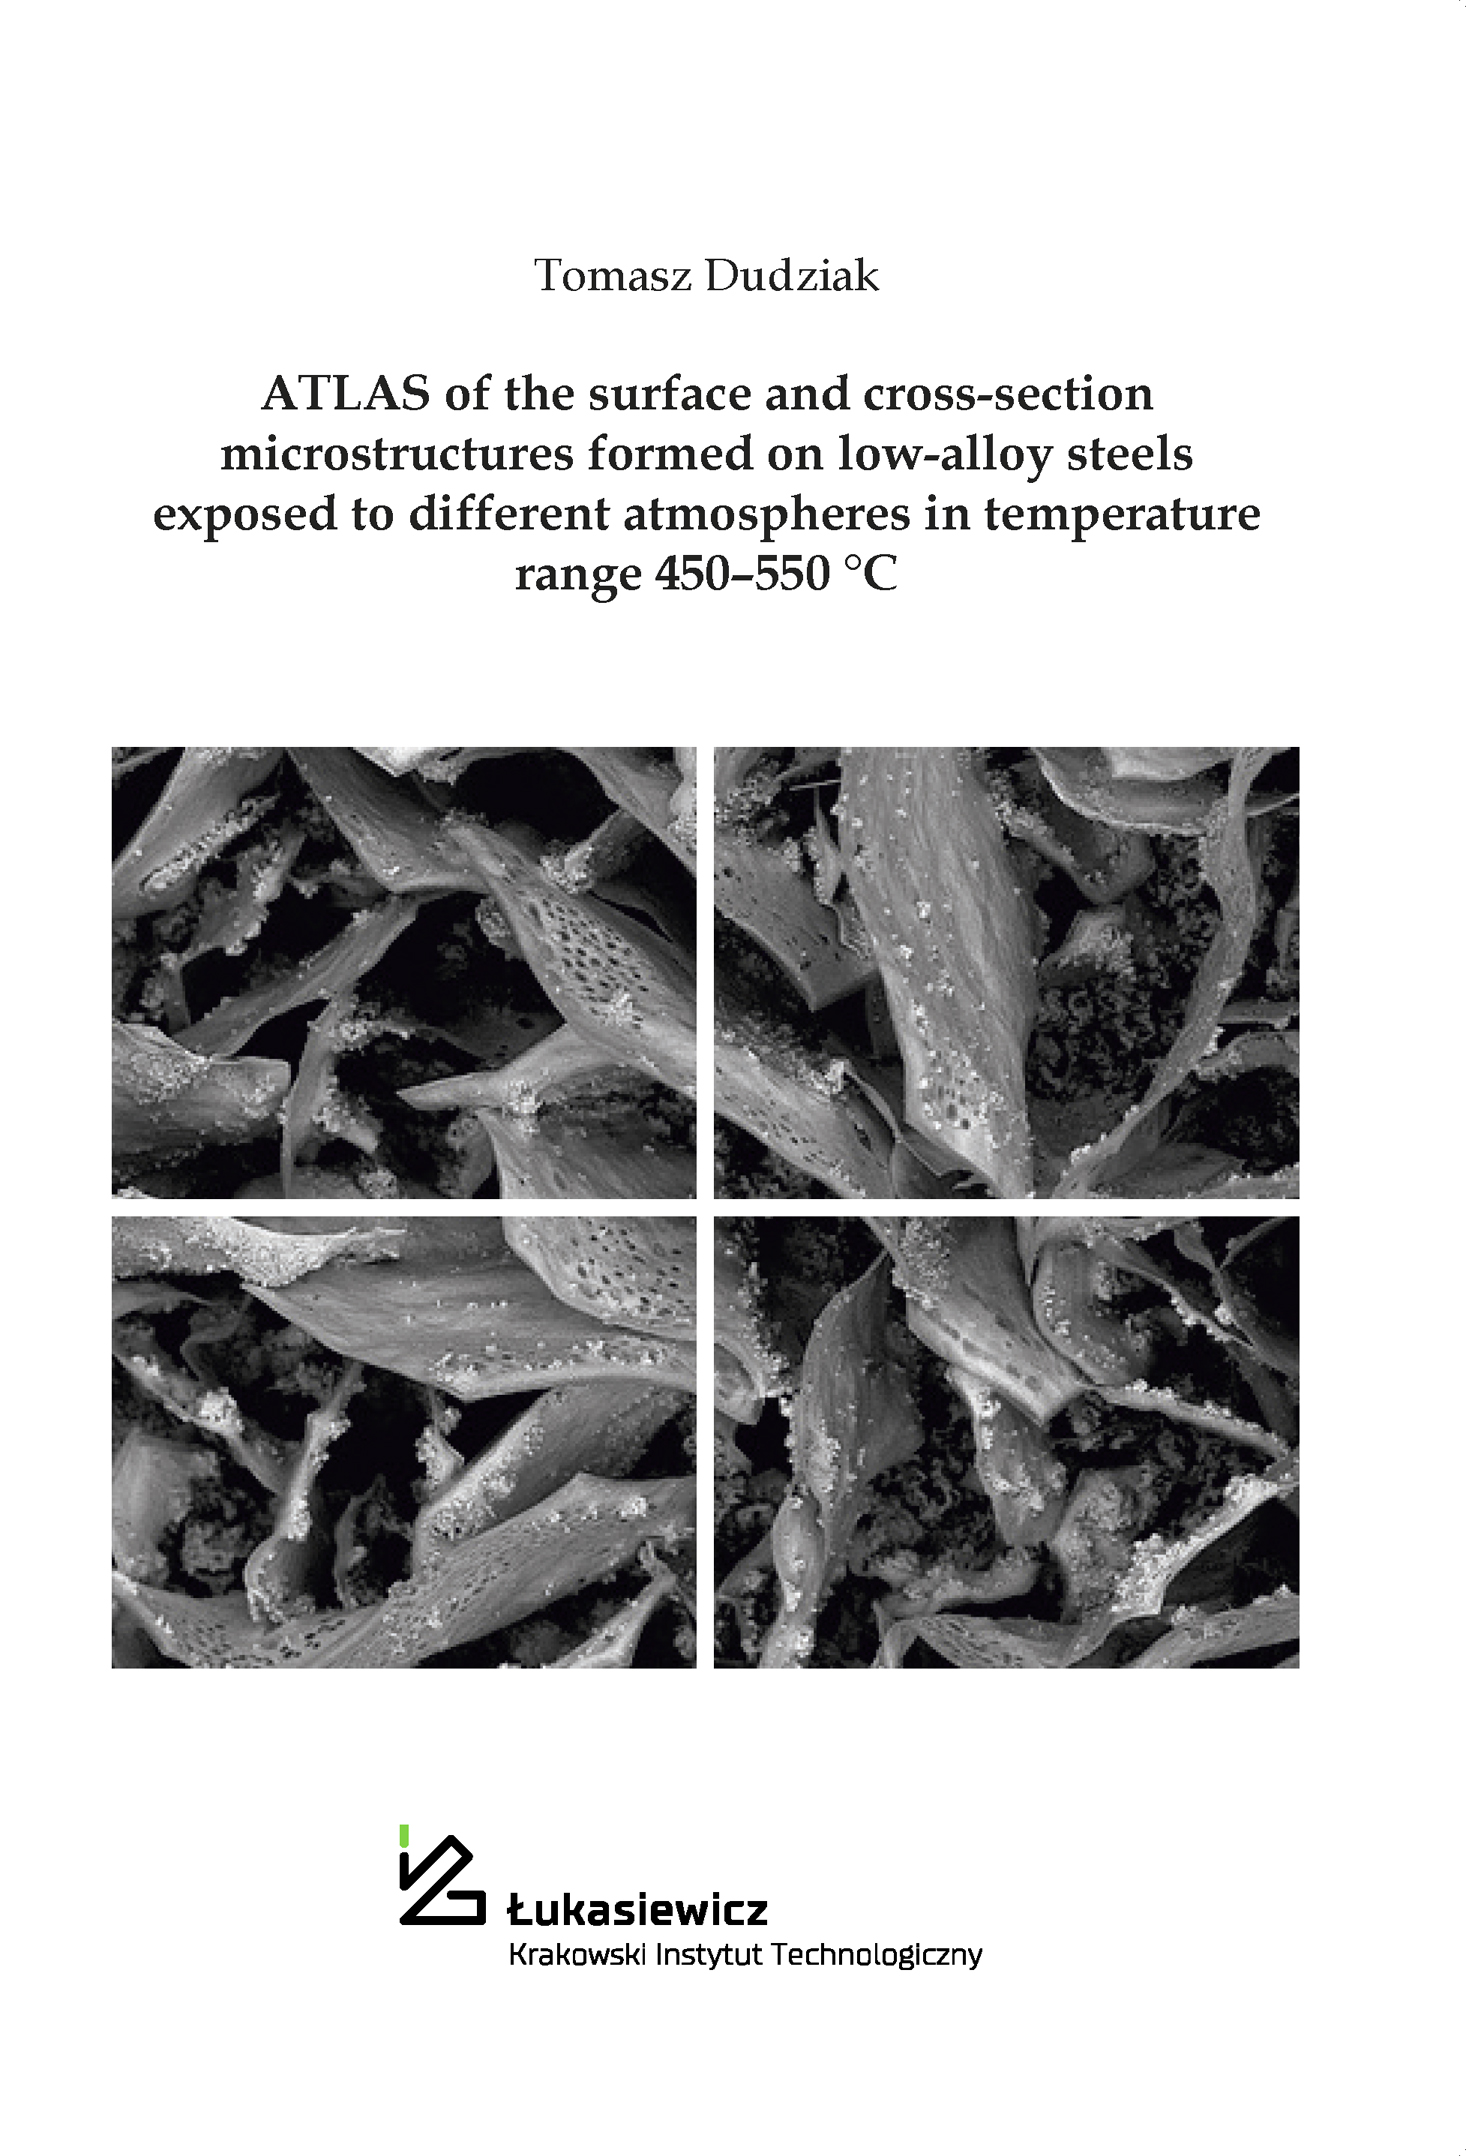 ATLAS of the surface and cross-section microstructures formed on low-alloy steels exposed to different atmospheres in temperature range 450–550 °C